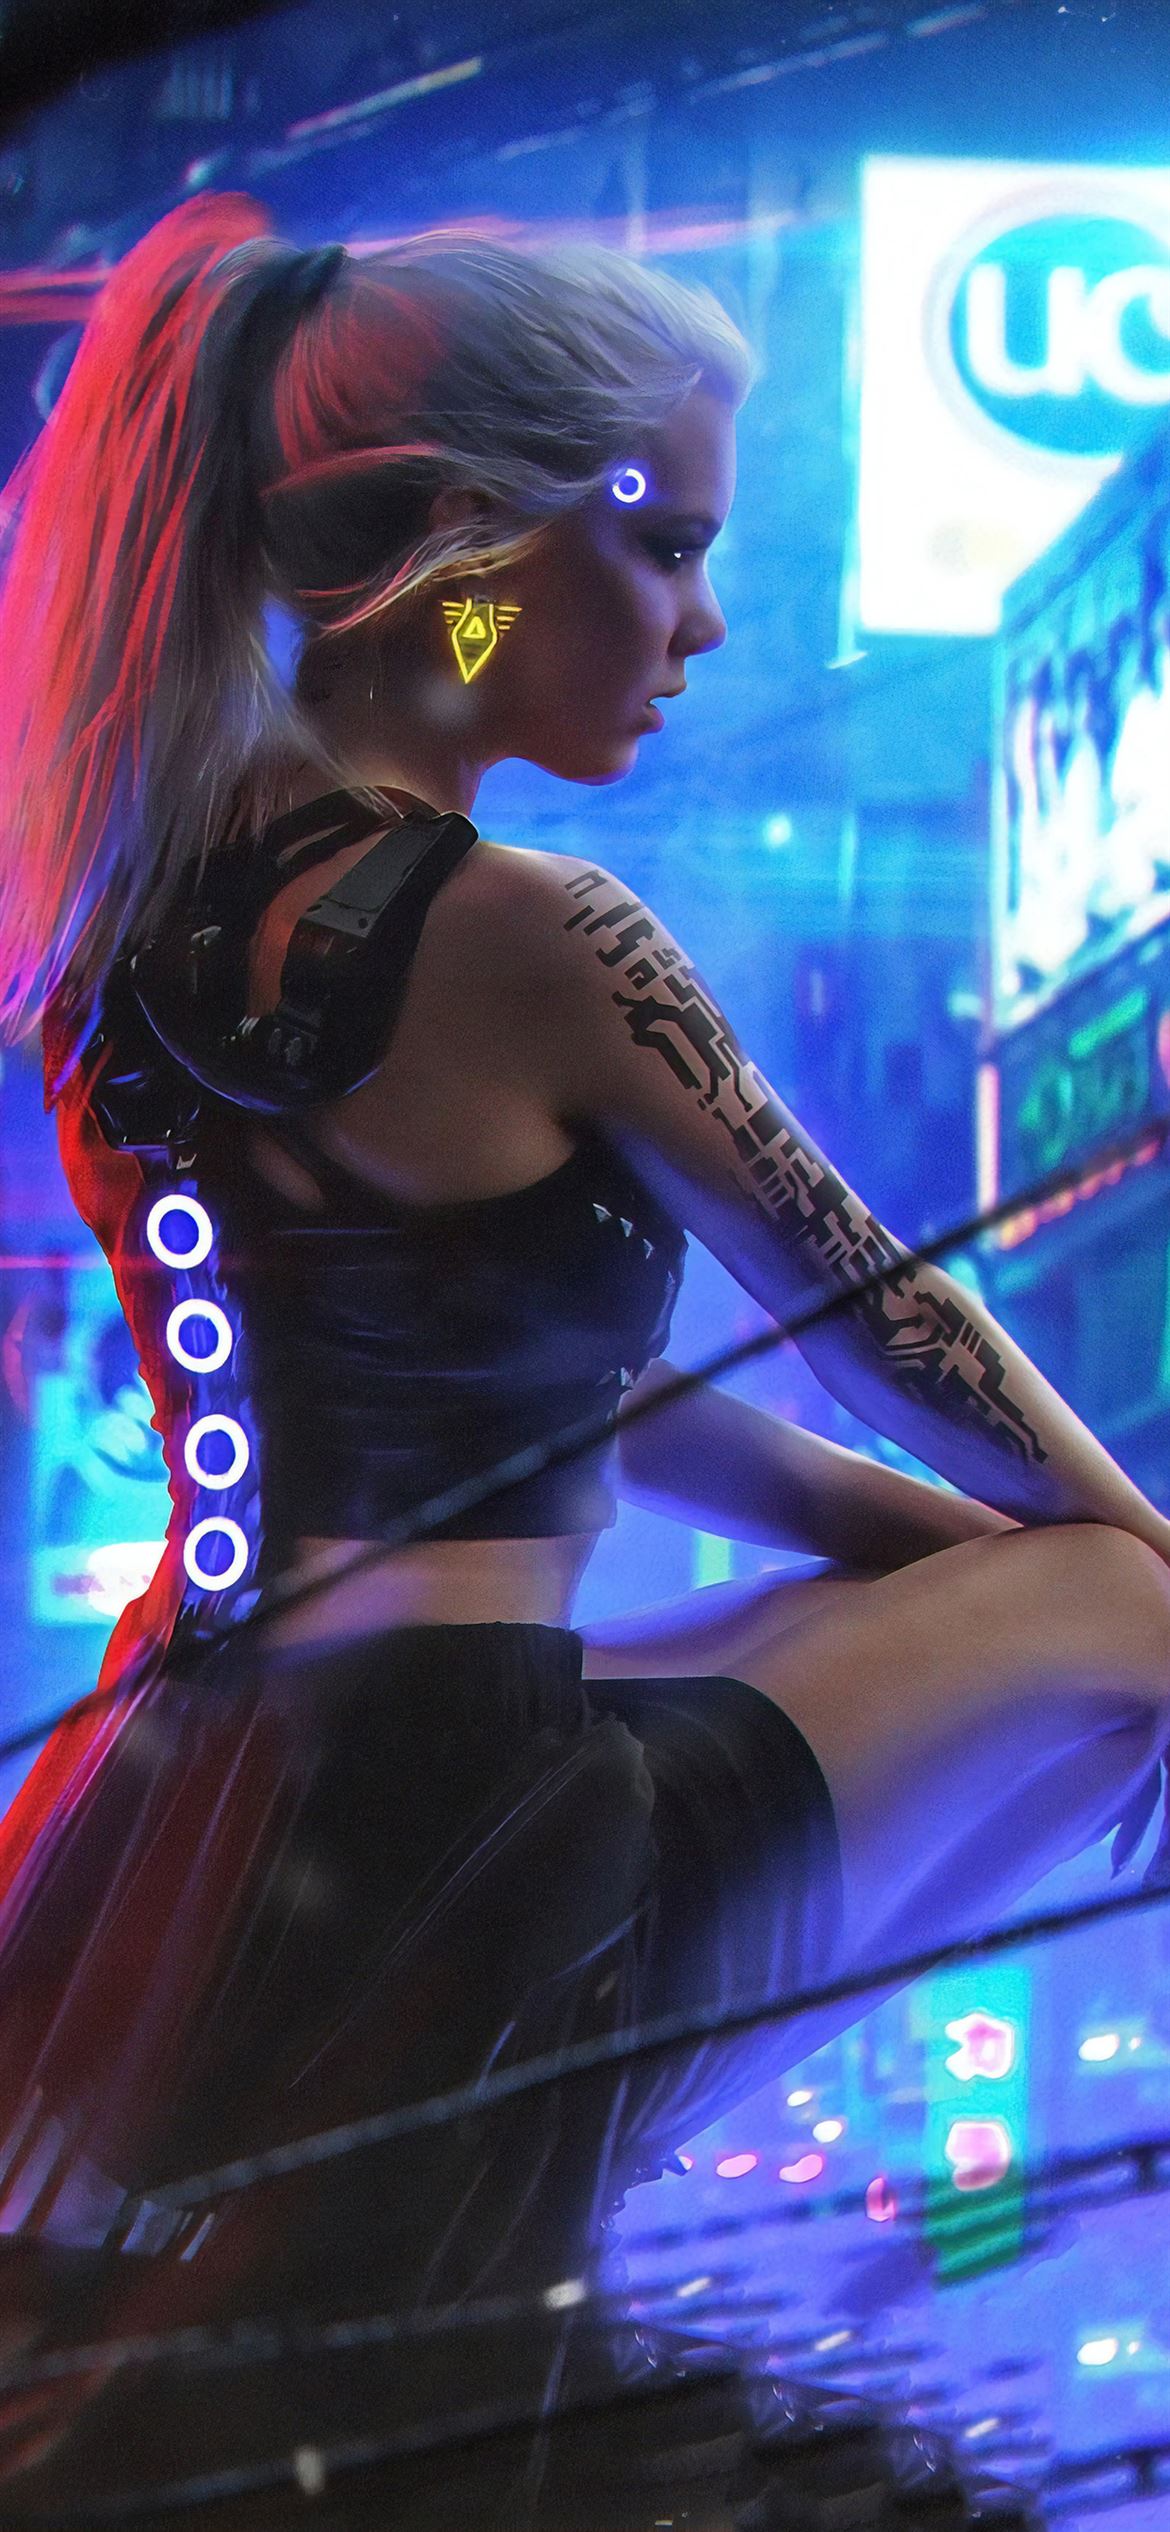 Cyberpunk Neon Girl 4k Iphone 12 Wallpapers Free Download Find the best wallpapers for your iphone, galaxy, xiaomi and others android devices. cyberpunk neon girl 4k iphone 12